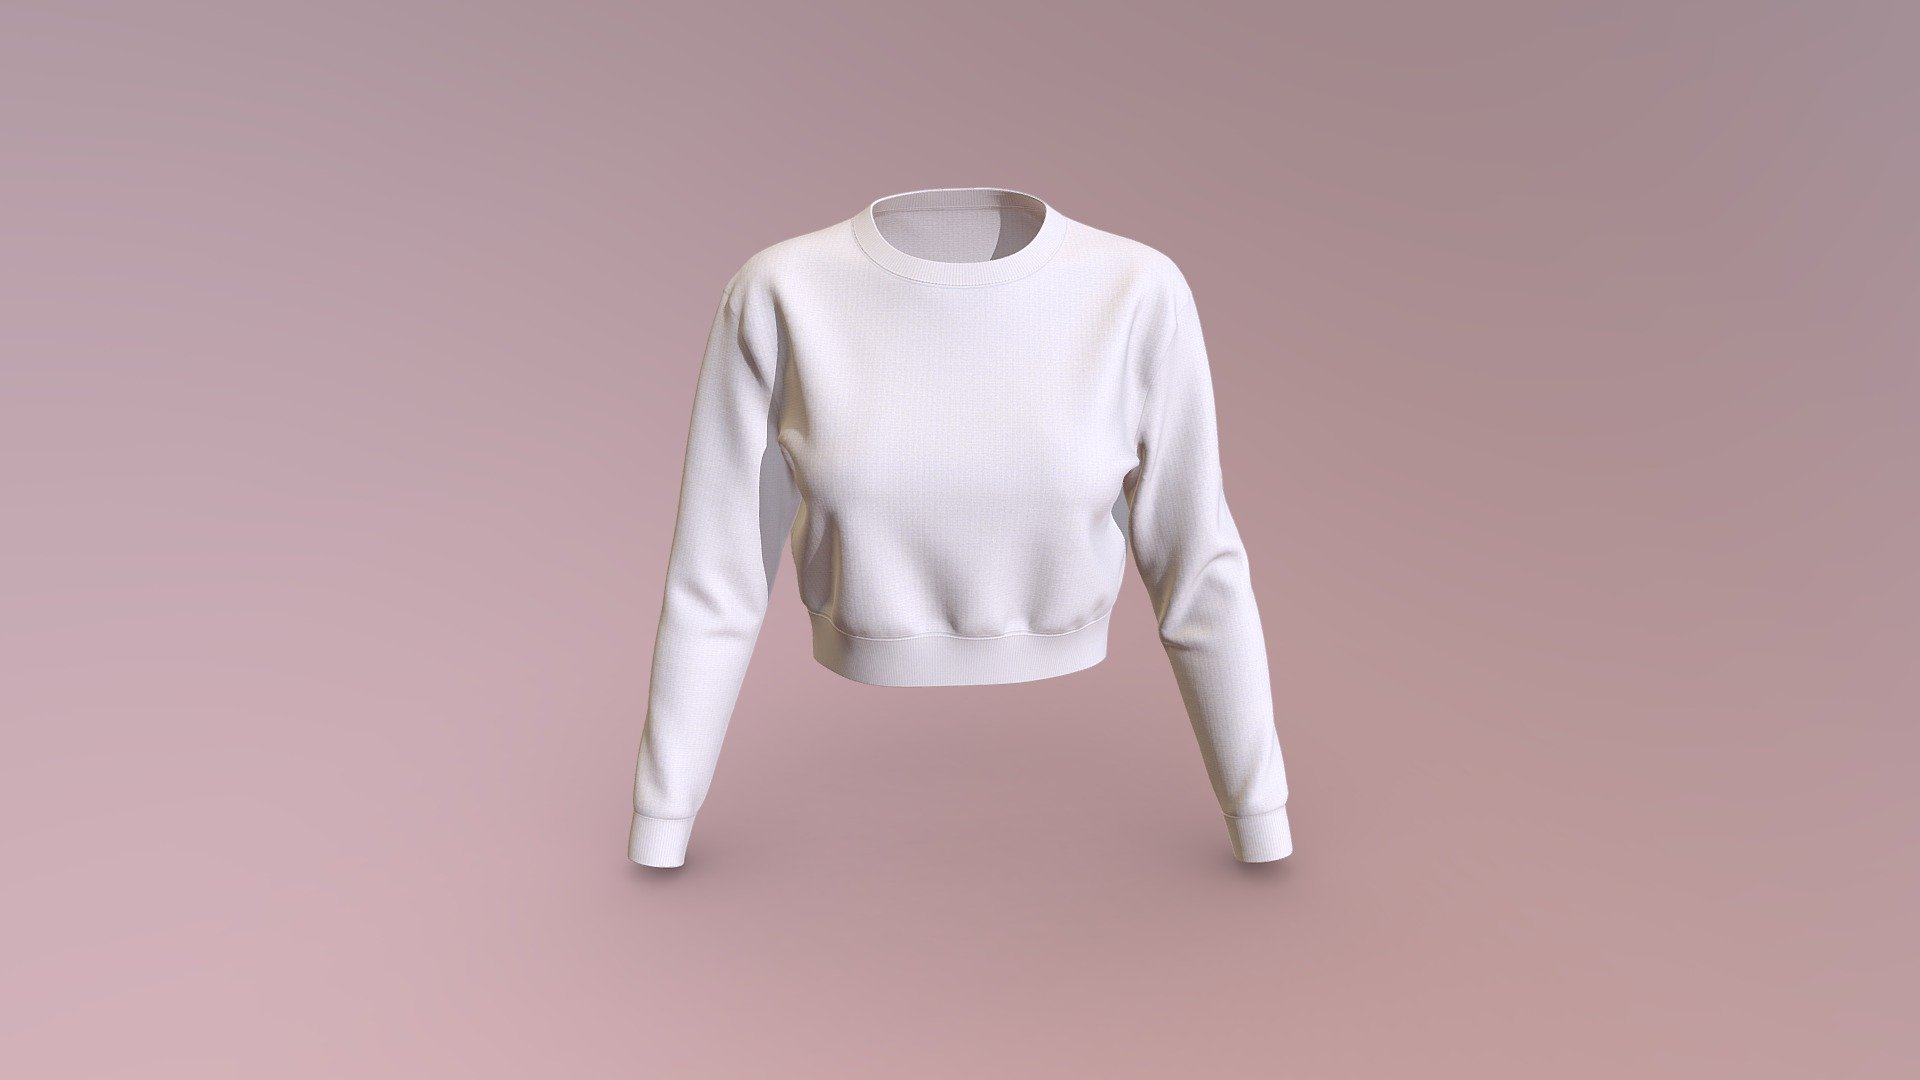 Cloth Title = Crop women’s sweatshirts 

SKU = DG100300 

Category = Women 

Product Type = Sweatshirt 

Cloth Length = Regular 

Body Fit = Regular Fit 

Occasion = Outerwear 

Sleeve Style = Long Sleeve 


Our Services:

3D Apparel Design.

OBJ,FBX,GLTF Making with High/Low Poly.

Fabric Digitalization.

Mockup making.

3D Teck Pack.

Pattern Making.
 
2D Illustration.

Cloth Animation and 360 Spin Video.


Contact us:- 

Email: info@digitalfashionwear.com 

Website: https://digitalfashionwear.com 


We designed all the types of cloth specially focused on product visualization, e-commerce, fitting, and production. 

We will design: 

T-shirts 

Polo shirts 

Hoodies 

Sweatshirt 

Jackets 

Shirts 

TankTops 

Trousers 

Bras 

Underwear 

Blazer 

Aprons 

Leggings 

and All Fashion items. 





Our goal is to make sure what we provide you, meets your demand 3d model